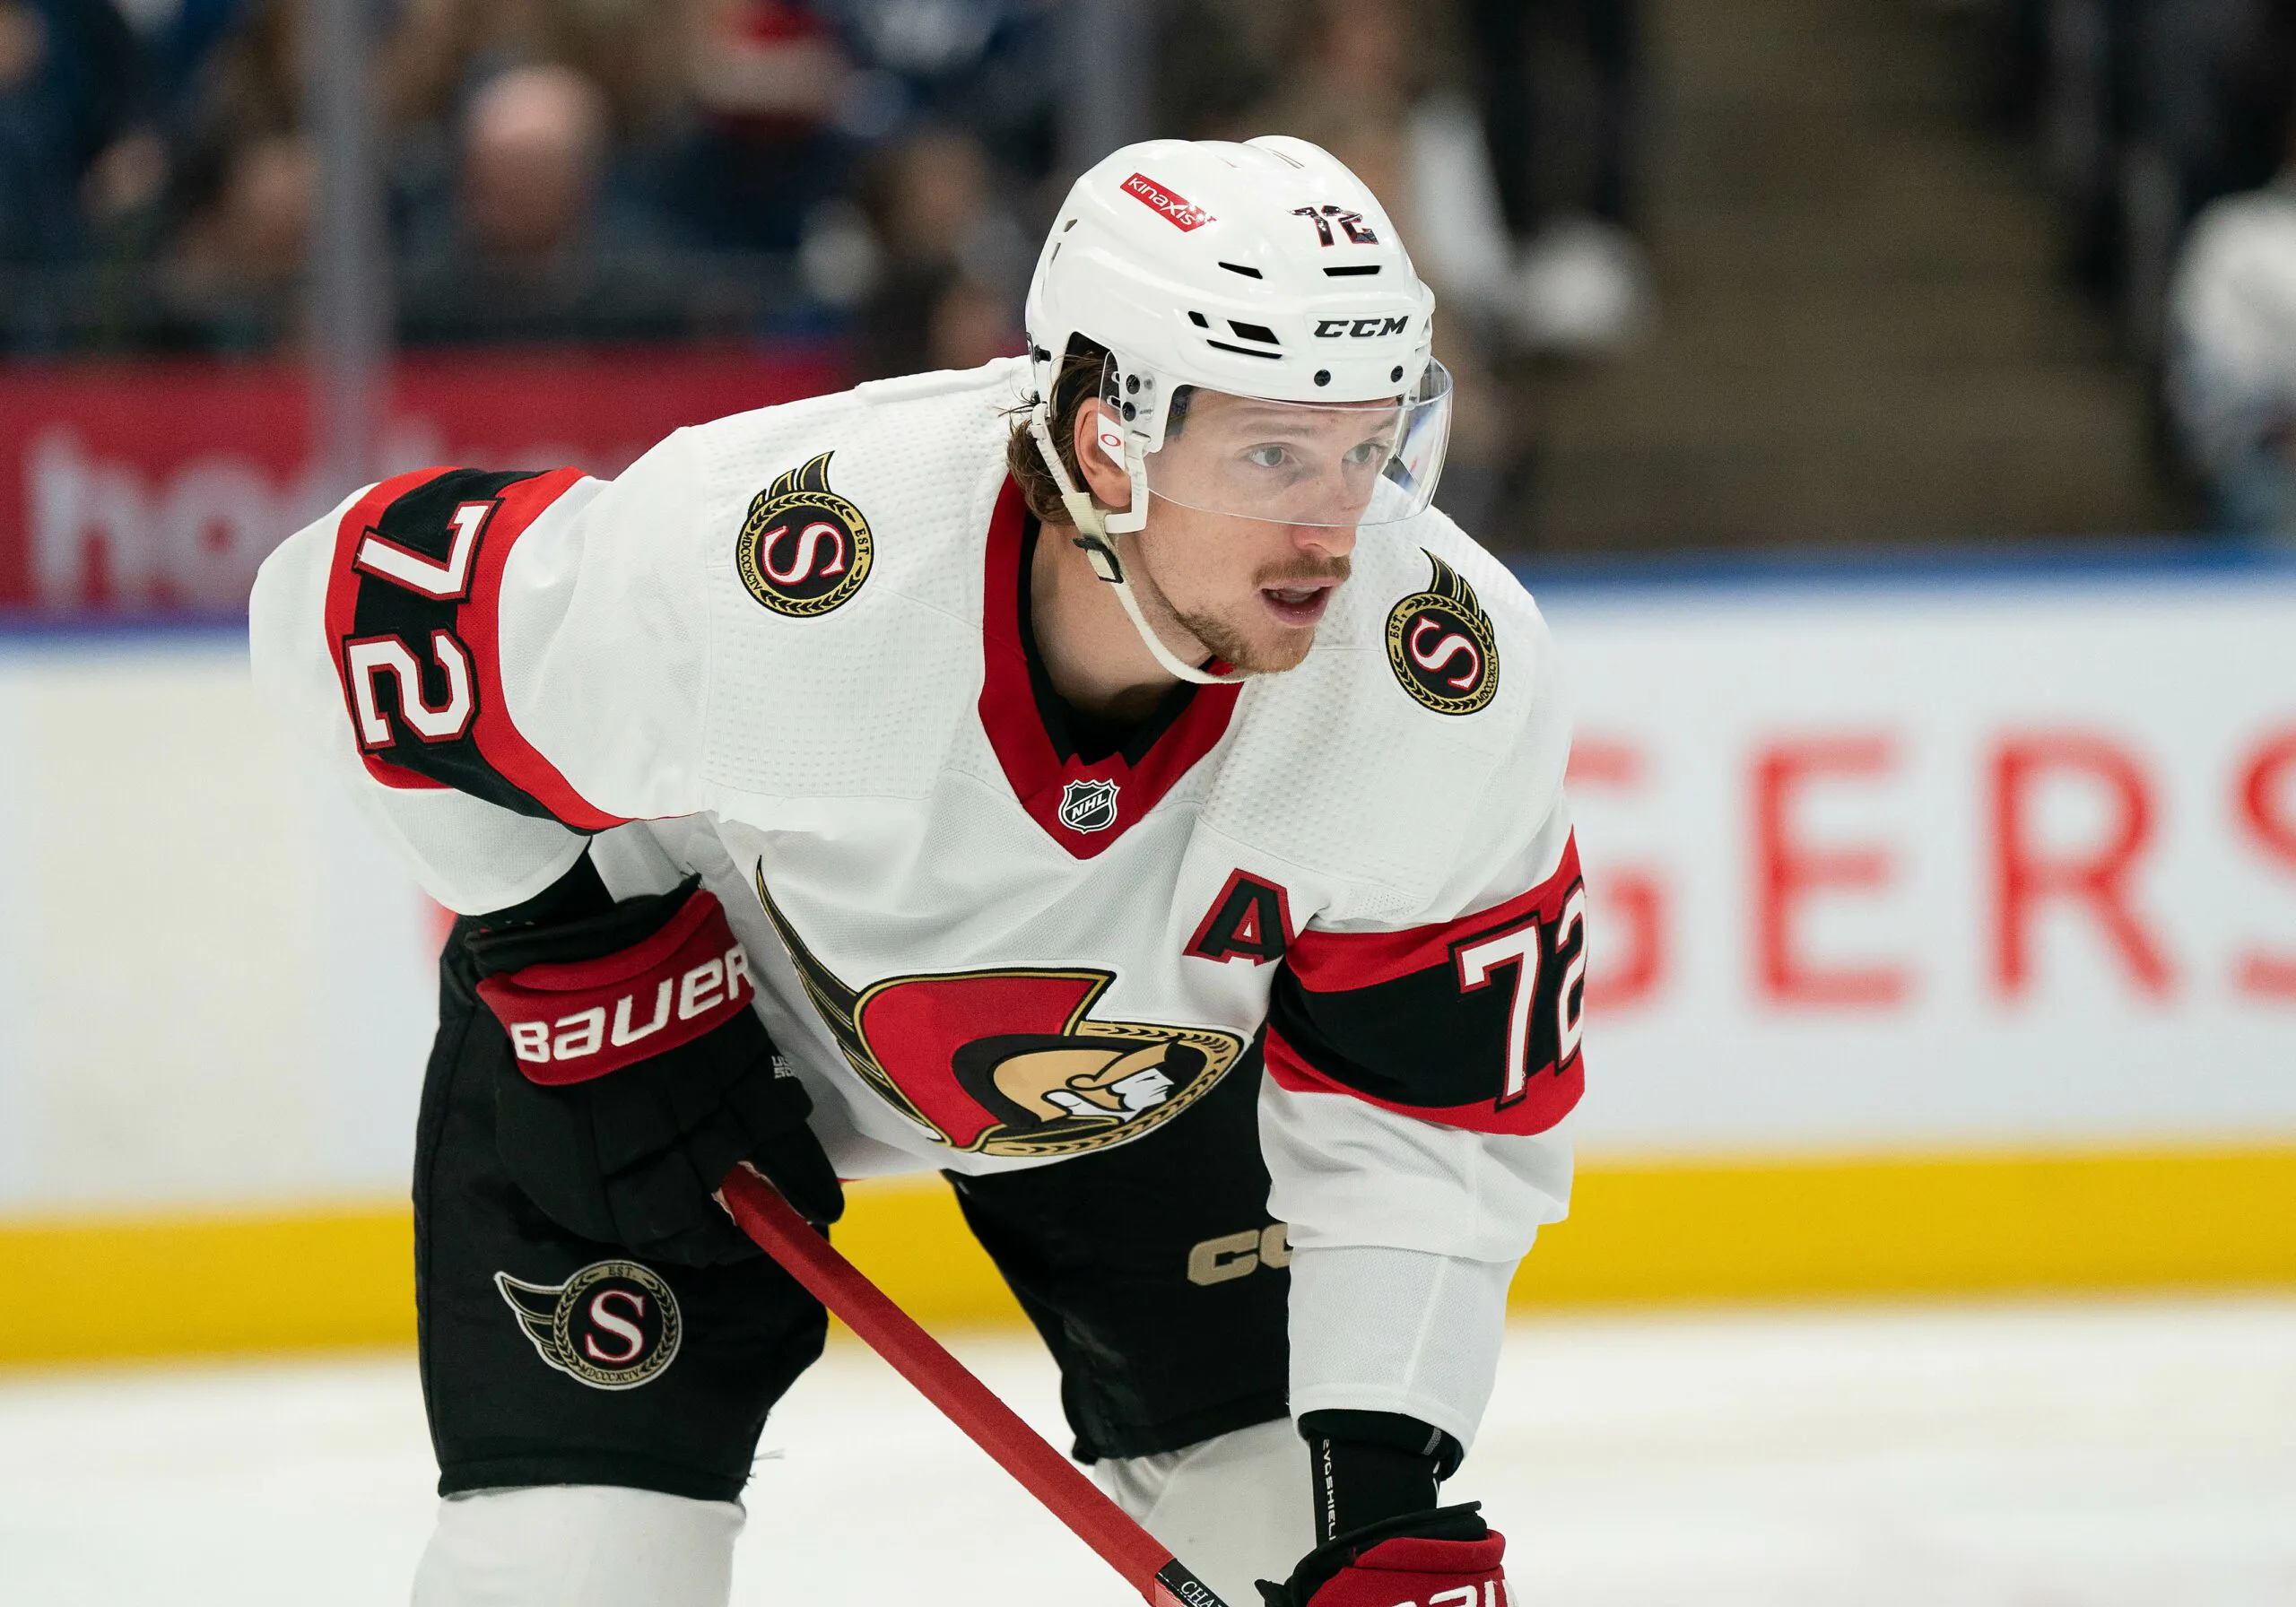 Thomas Chabot out at least a week with concussion